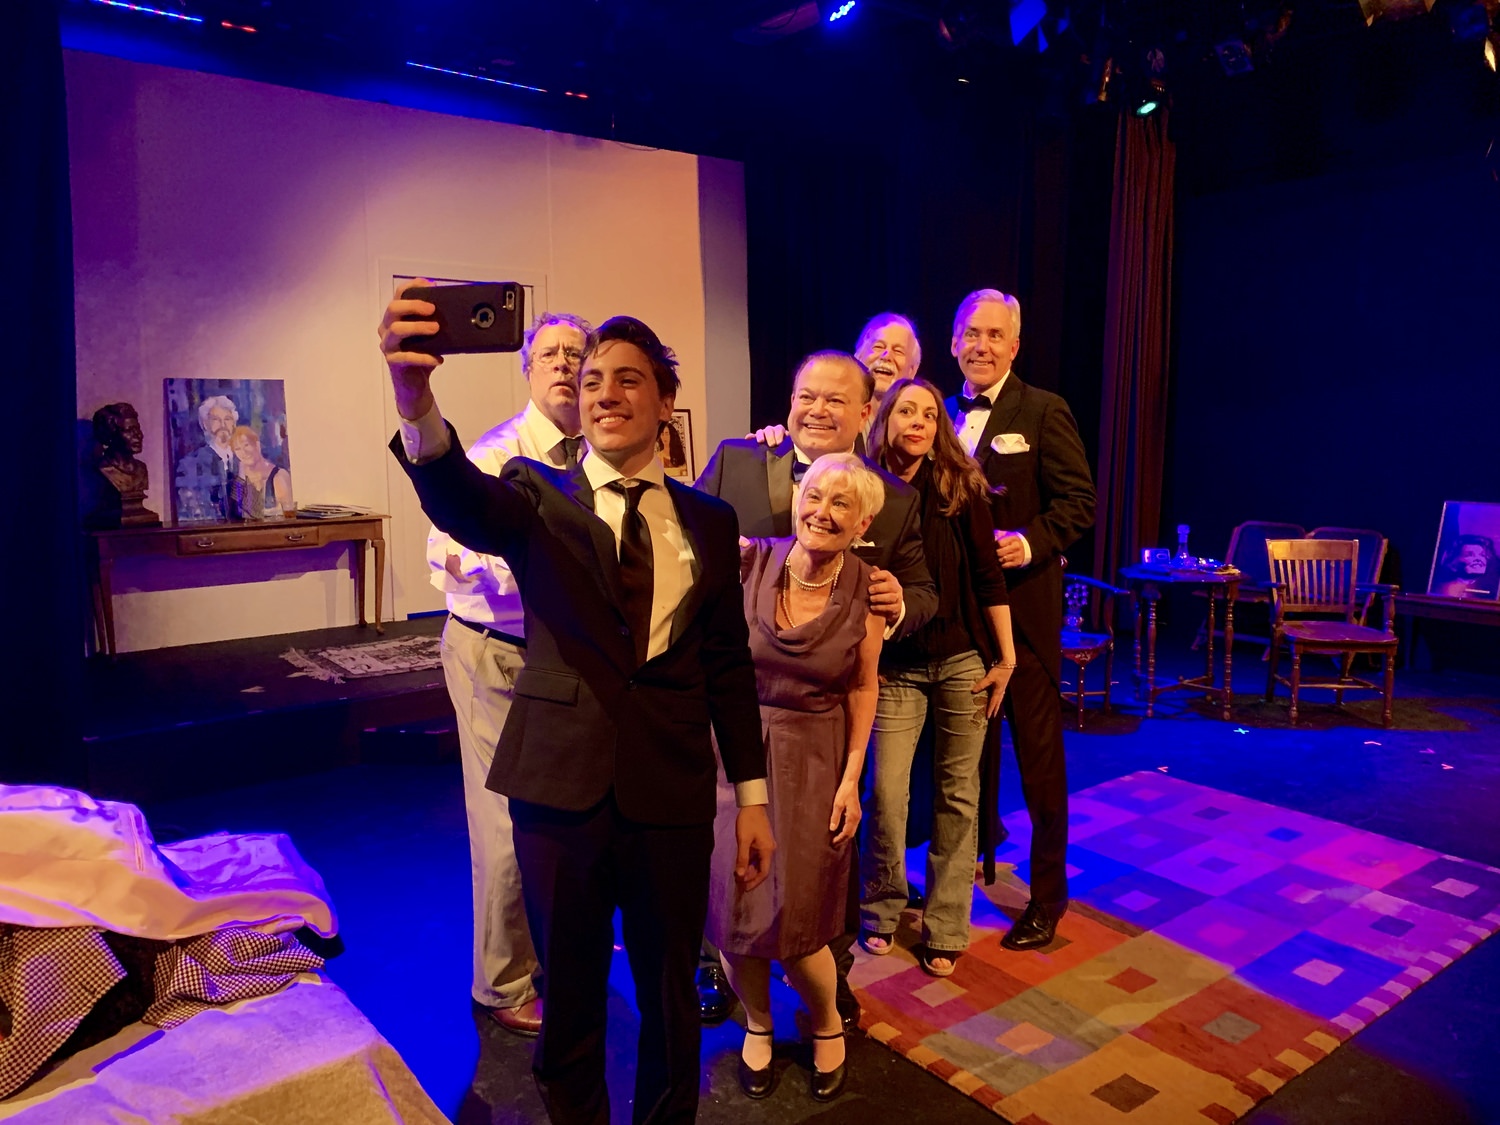 ?Let?s take a selfie first!? Gus takes a group Selfie of the creative team eagerly awaiting the New York Times review of Peter Austin?s new play ?The Golden Egg? in Terrence McNally?s Broadway Hit Play IT?S ONLY A PLAY. Cast includes Scott Terry, Nick McLean, Cathryn Collopy O'Donnell, John Richard Petersen, Phil Parker, Catherine Sadlier and Eric Dunn 